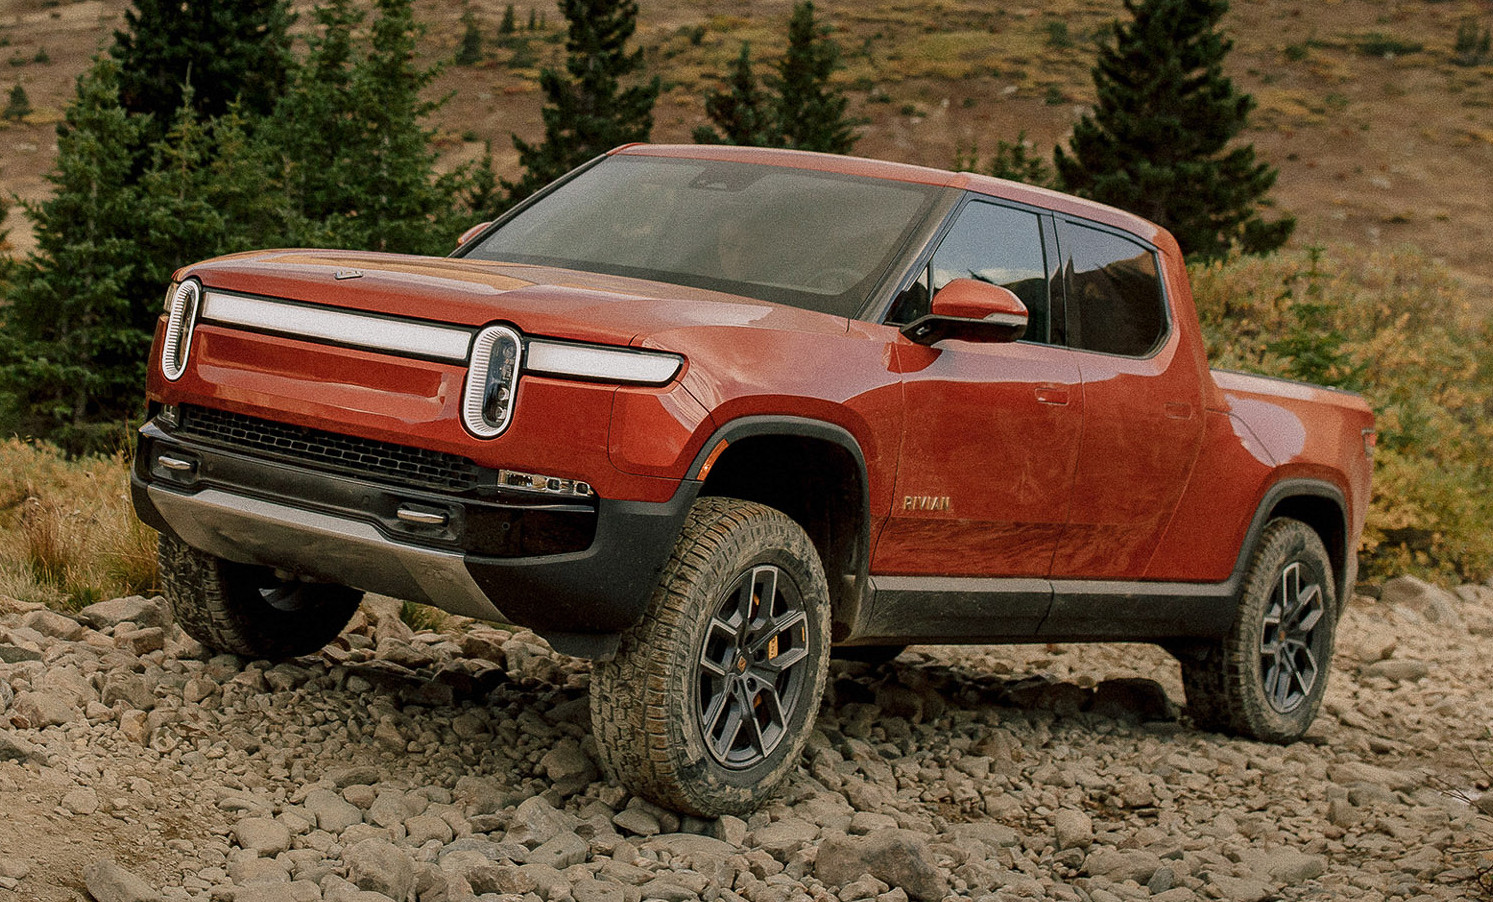 2022 Rivian R1T Launch Edition (135 kWh)